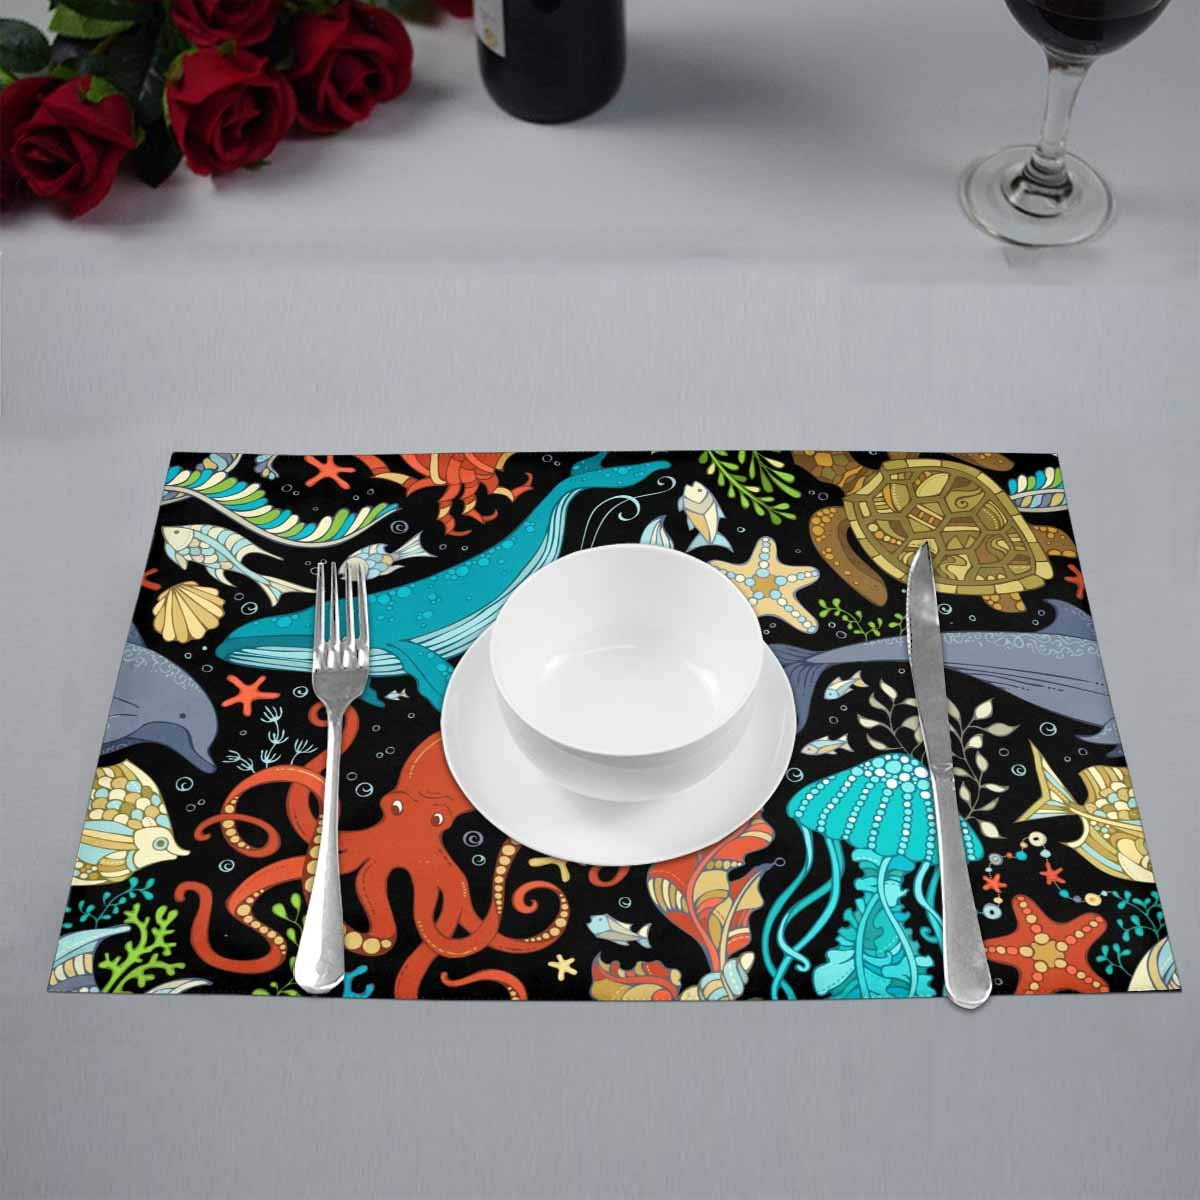 2 REVERSIBLE NON CLEAR HARD PLASTIC PLACEMATS 12"x18",SEALIFE,SEAHORSE & CRAB,CA 